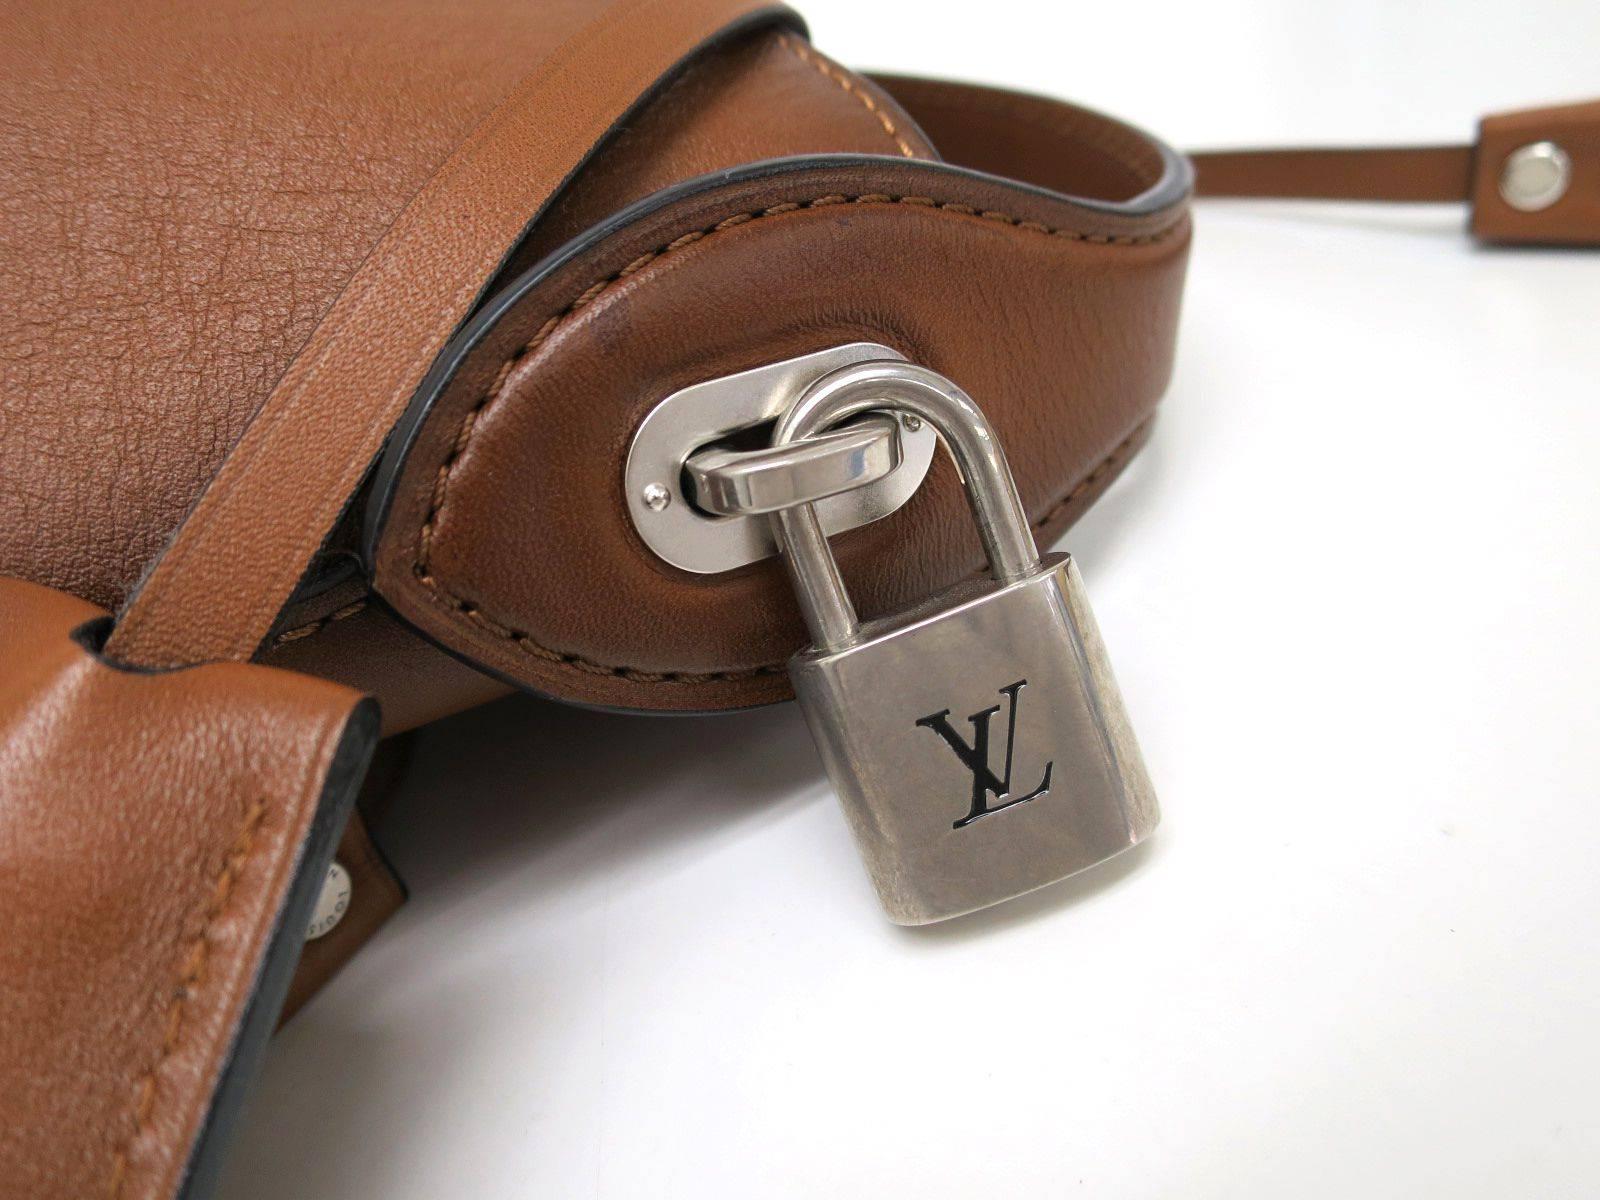 CURATOR'S NOTES

A modern play on the popular bucket shoulder bag, this Louis Vuitton Cuir Nuance GM boasts rich cognac brown leather accented with silver hardware and classic Louis Vuitton lock and key. 

Retail price $3,400
Leather
Silver